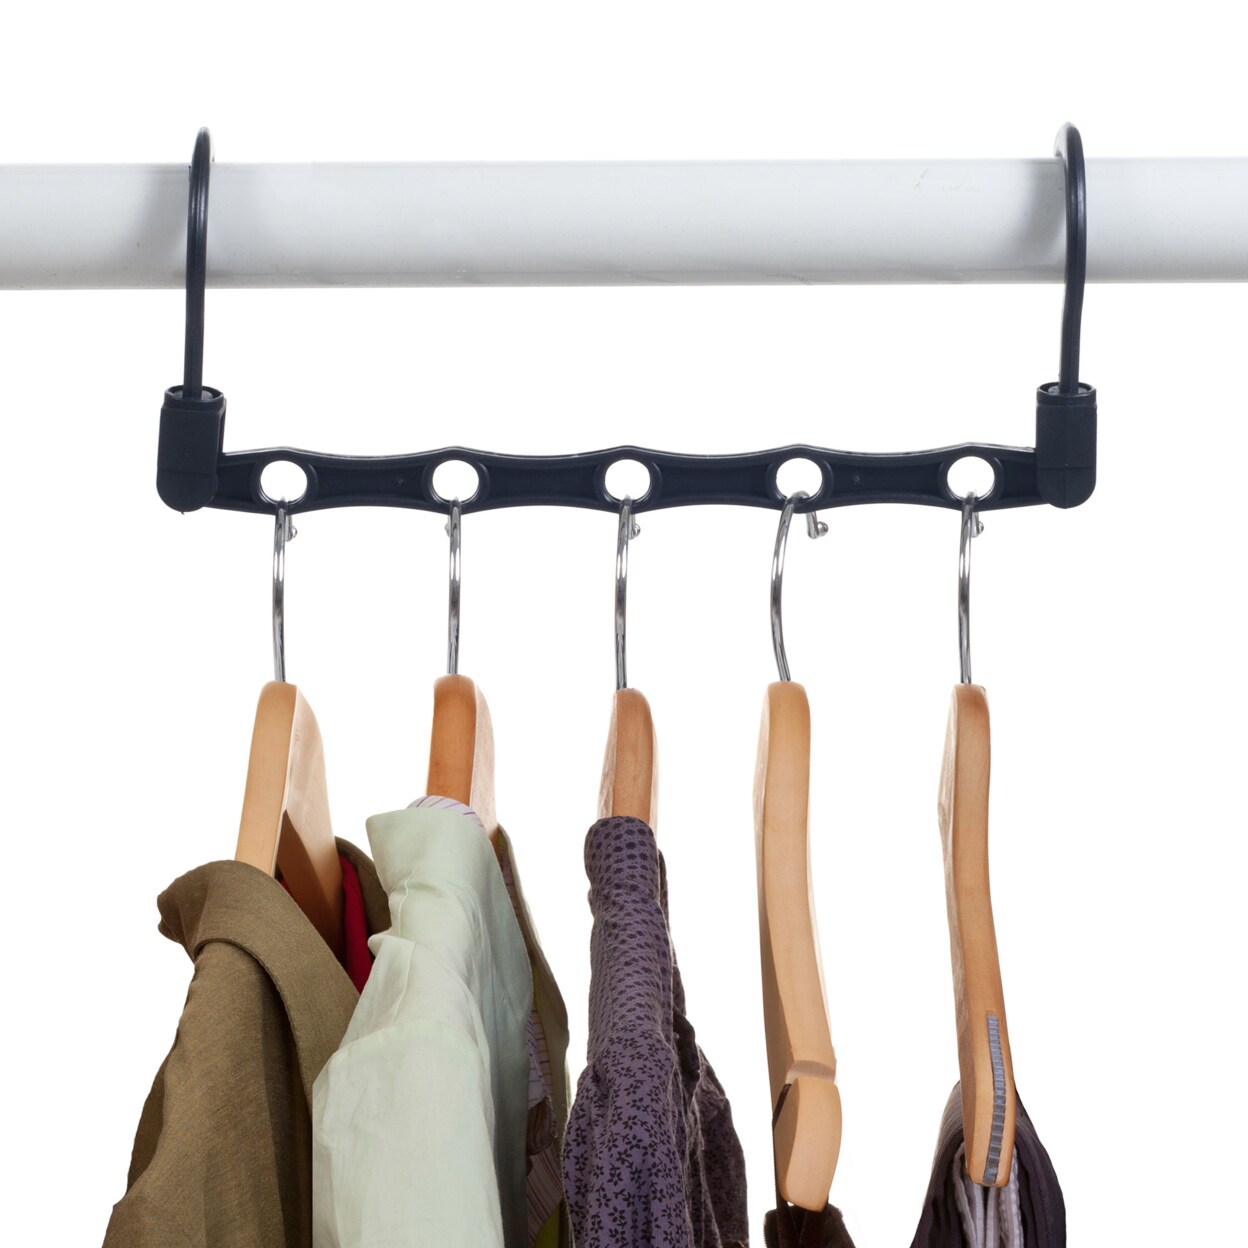 Everyday Home Set of 10 Magic Hangers - As Seen On T.V.